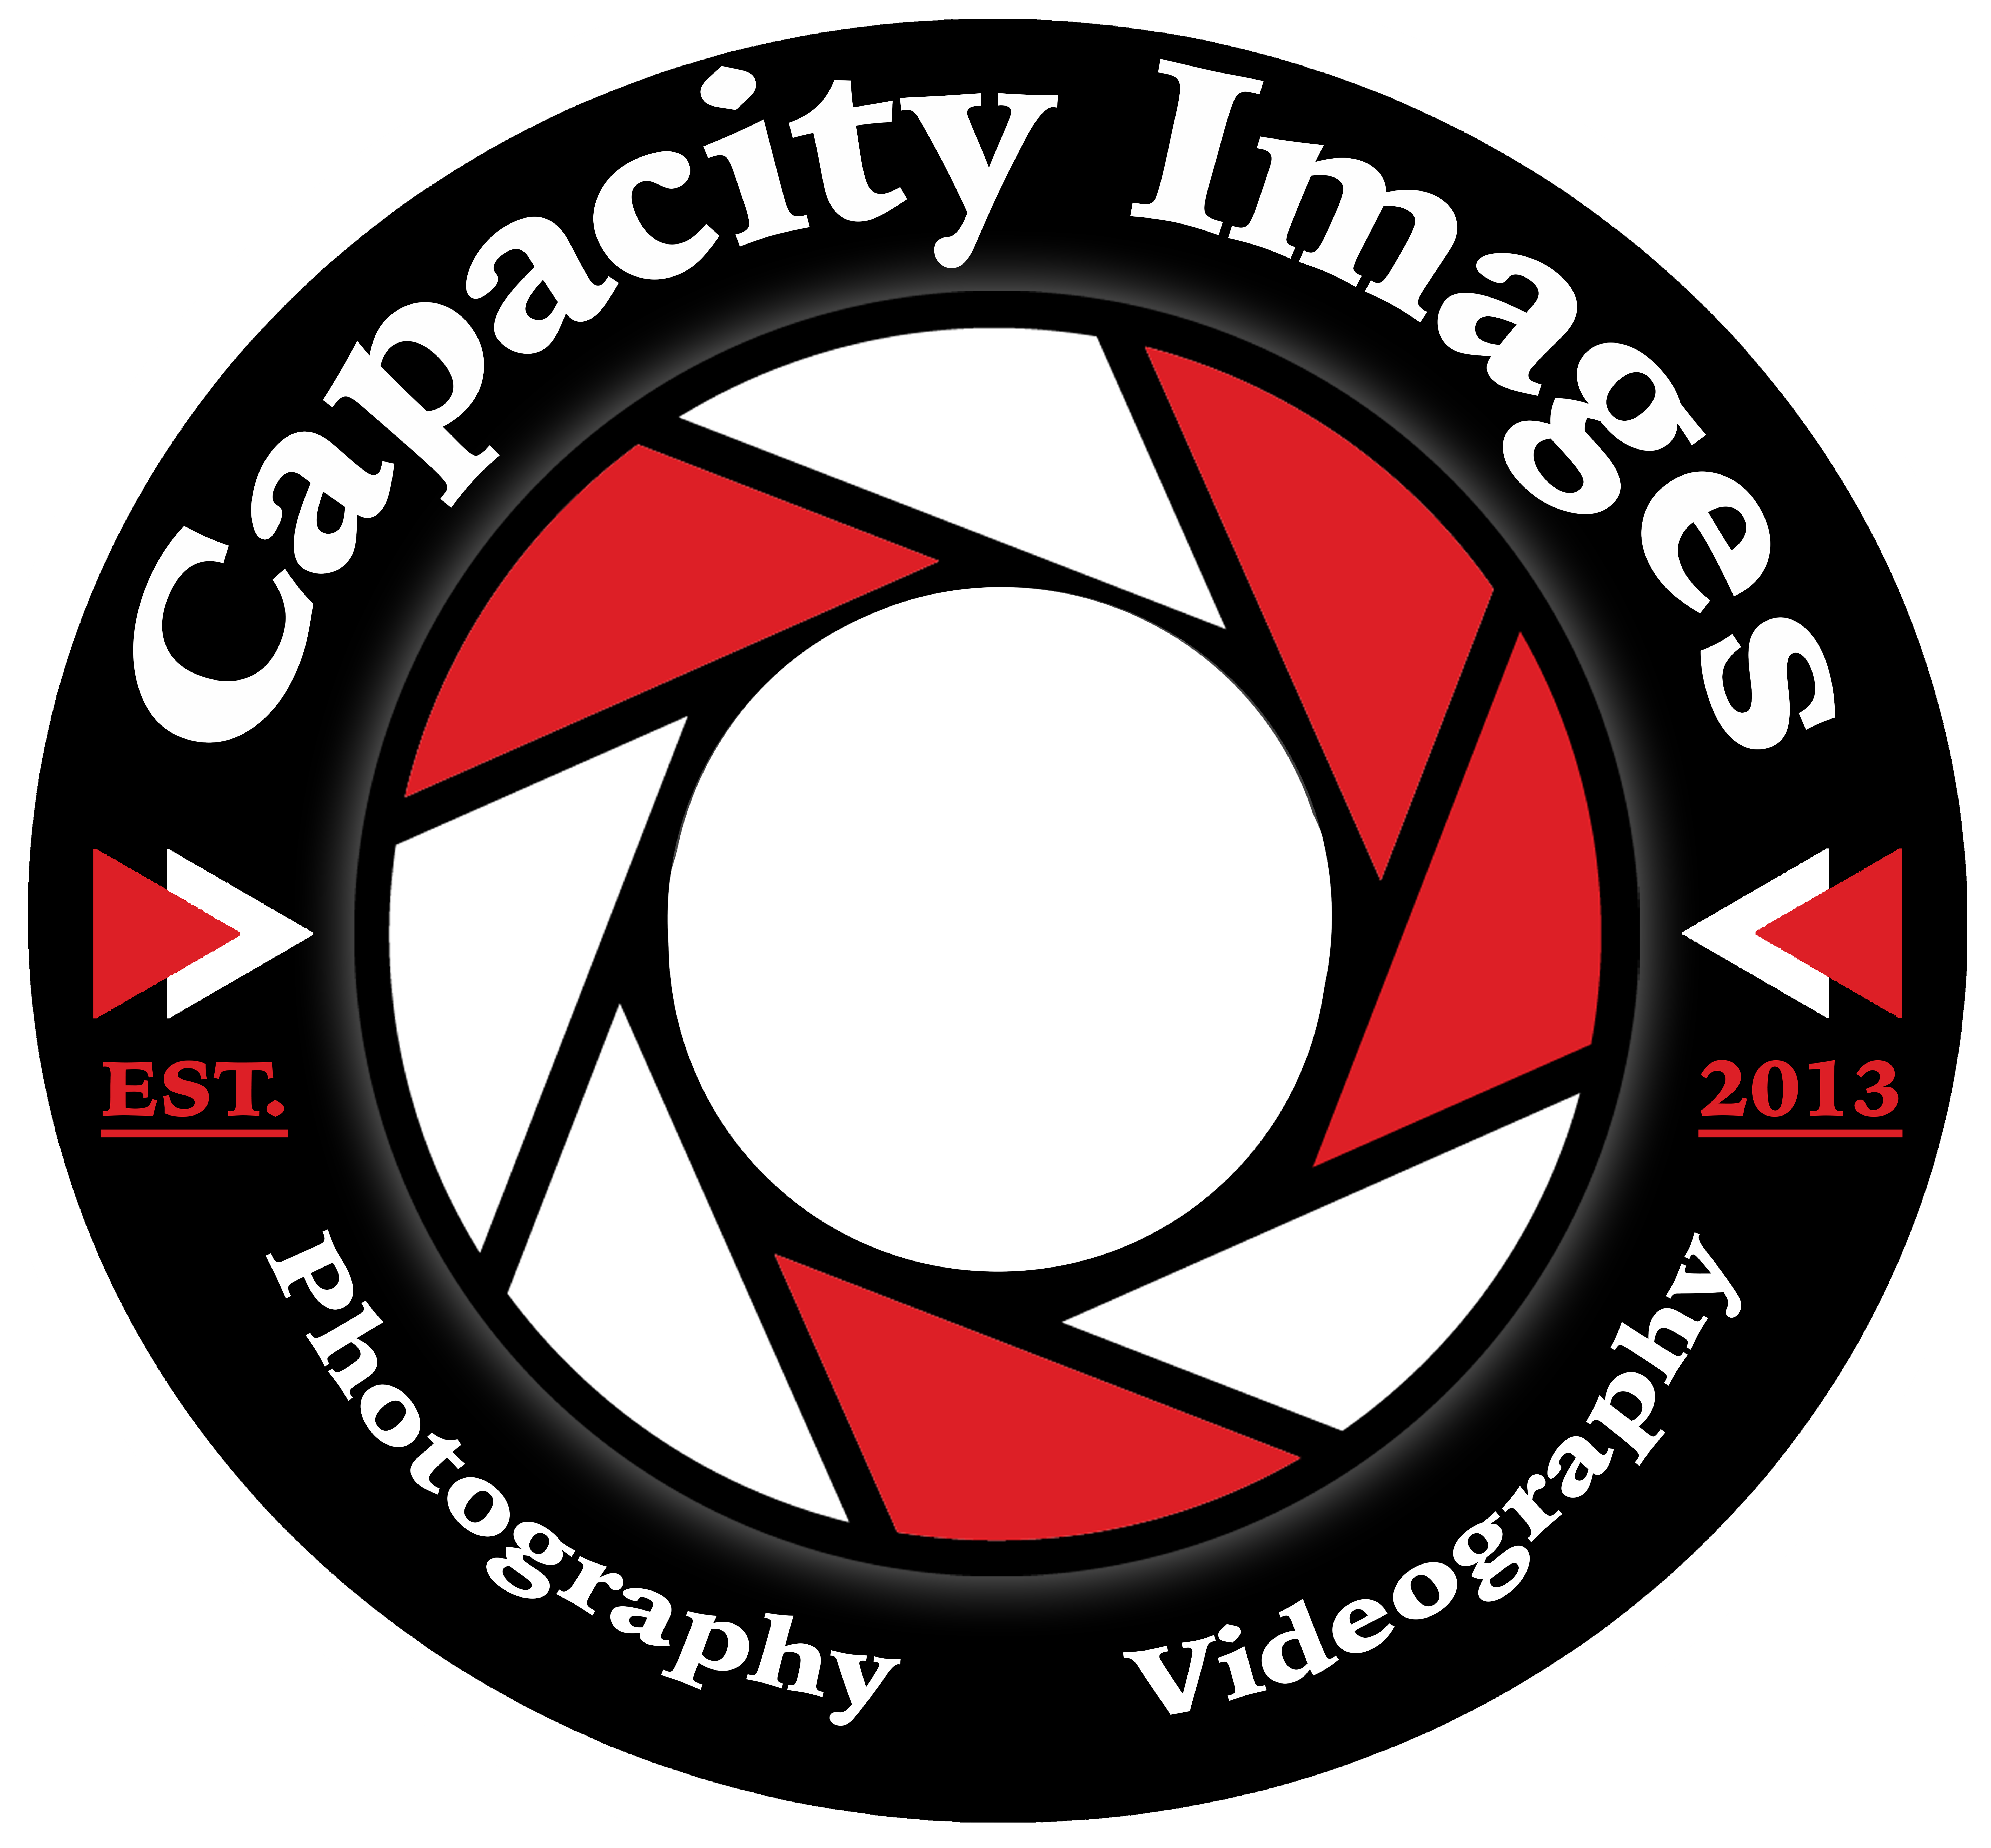 Capacity Images